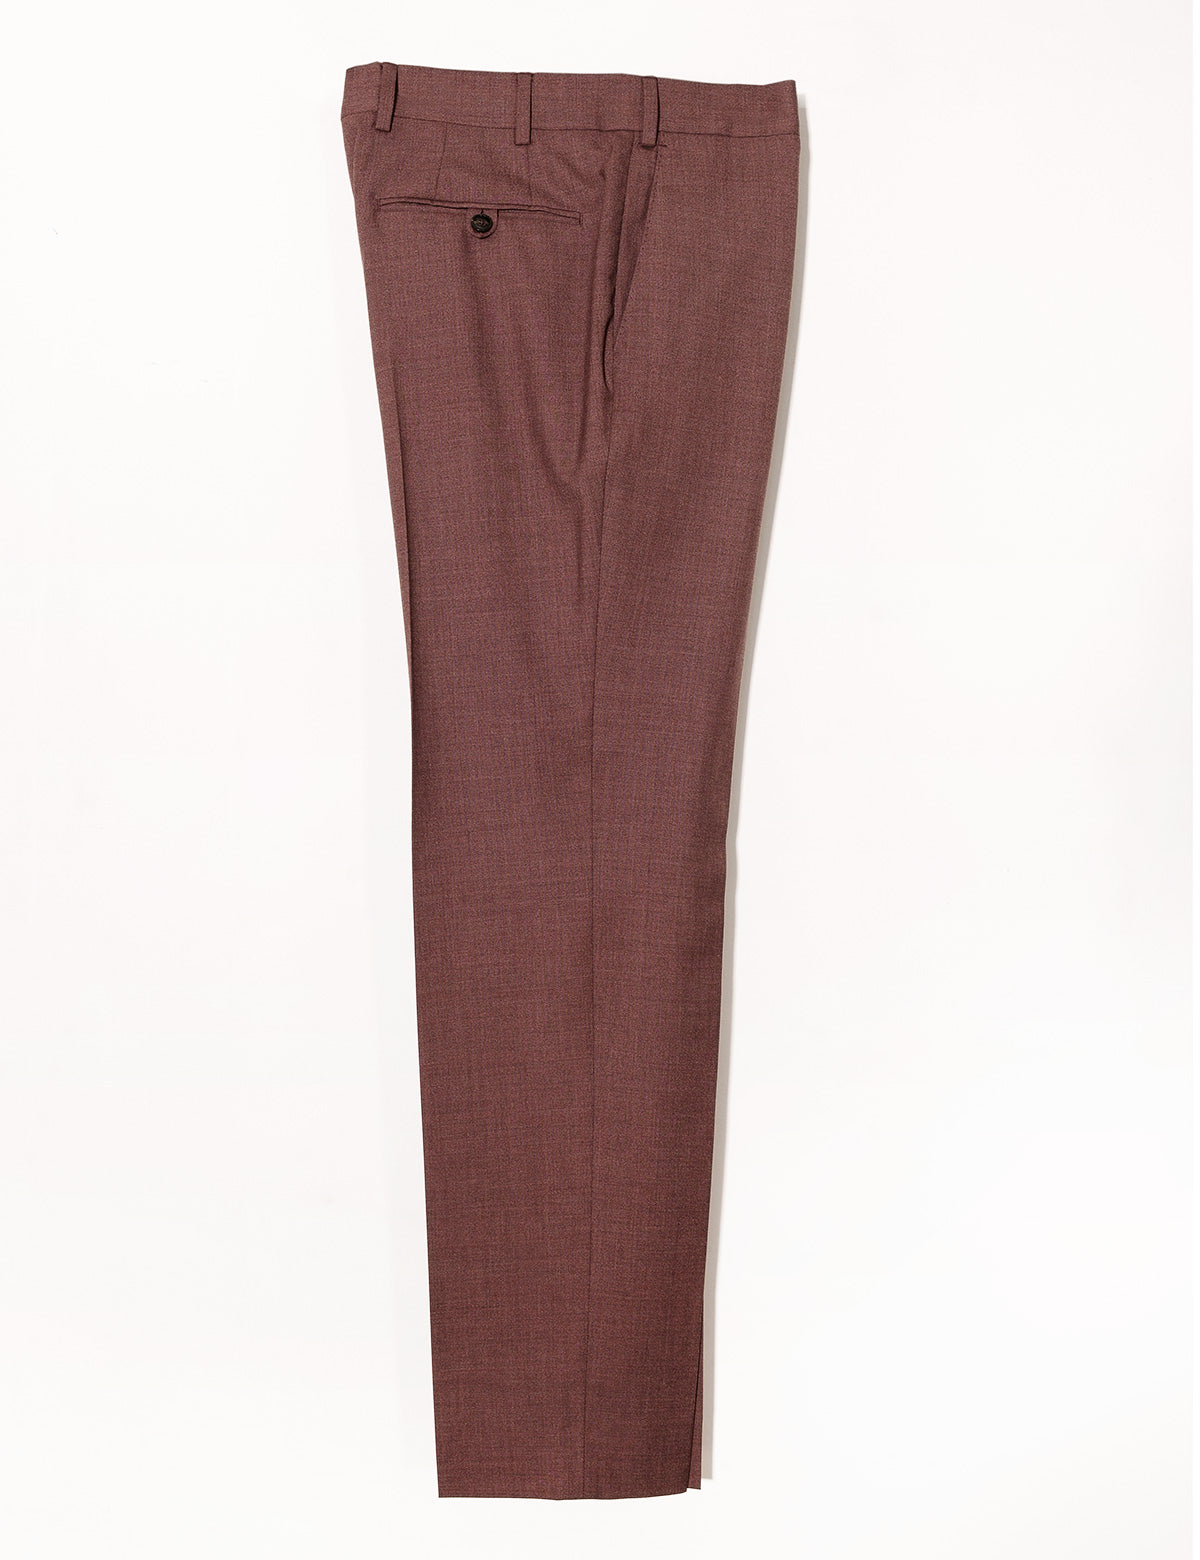 Brooklyn Tailors BKT50 Tailored Trousers in 14.5 Micron Mouliné - Cordovan full length flat shot